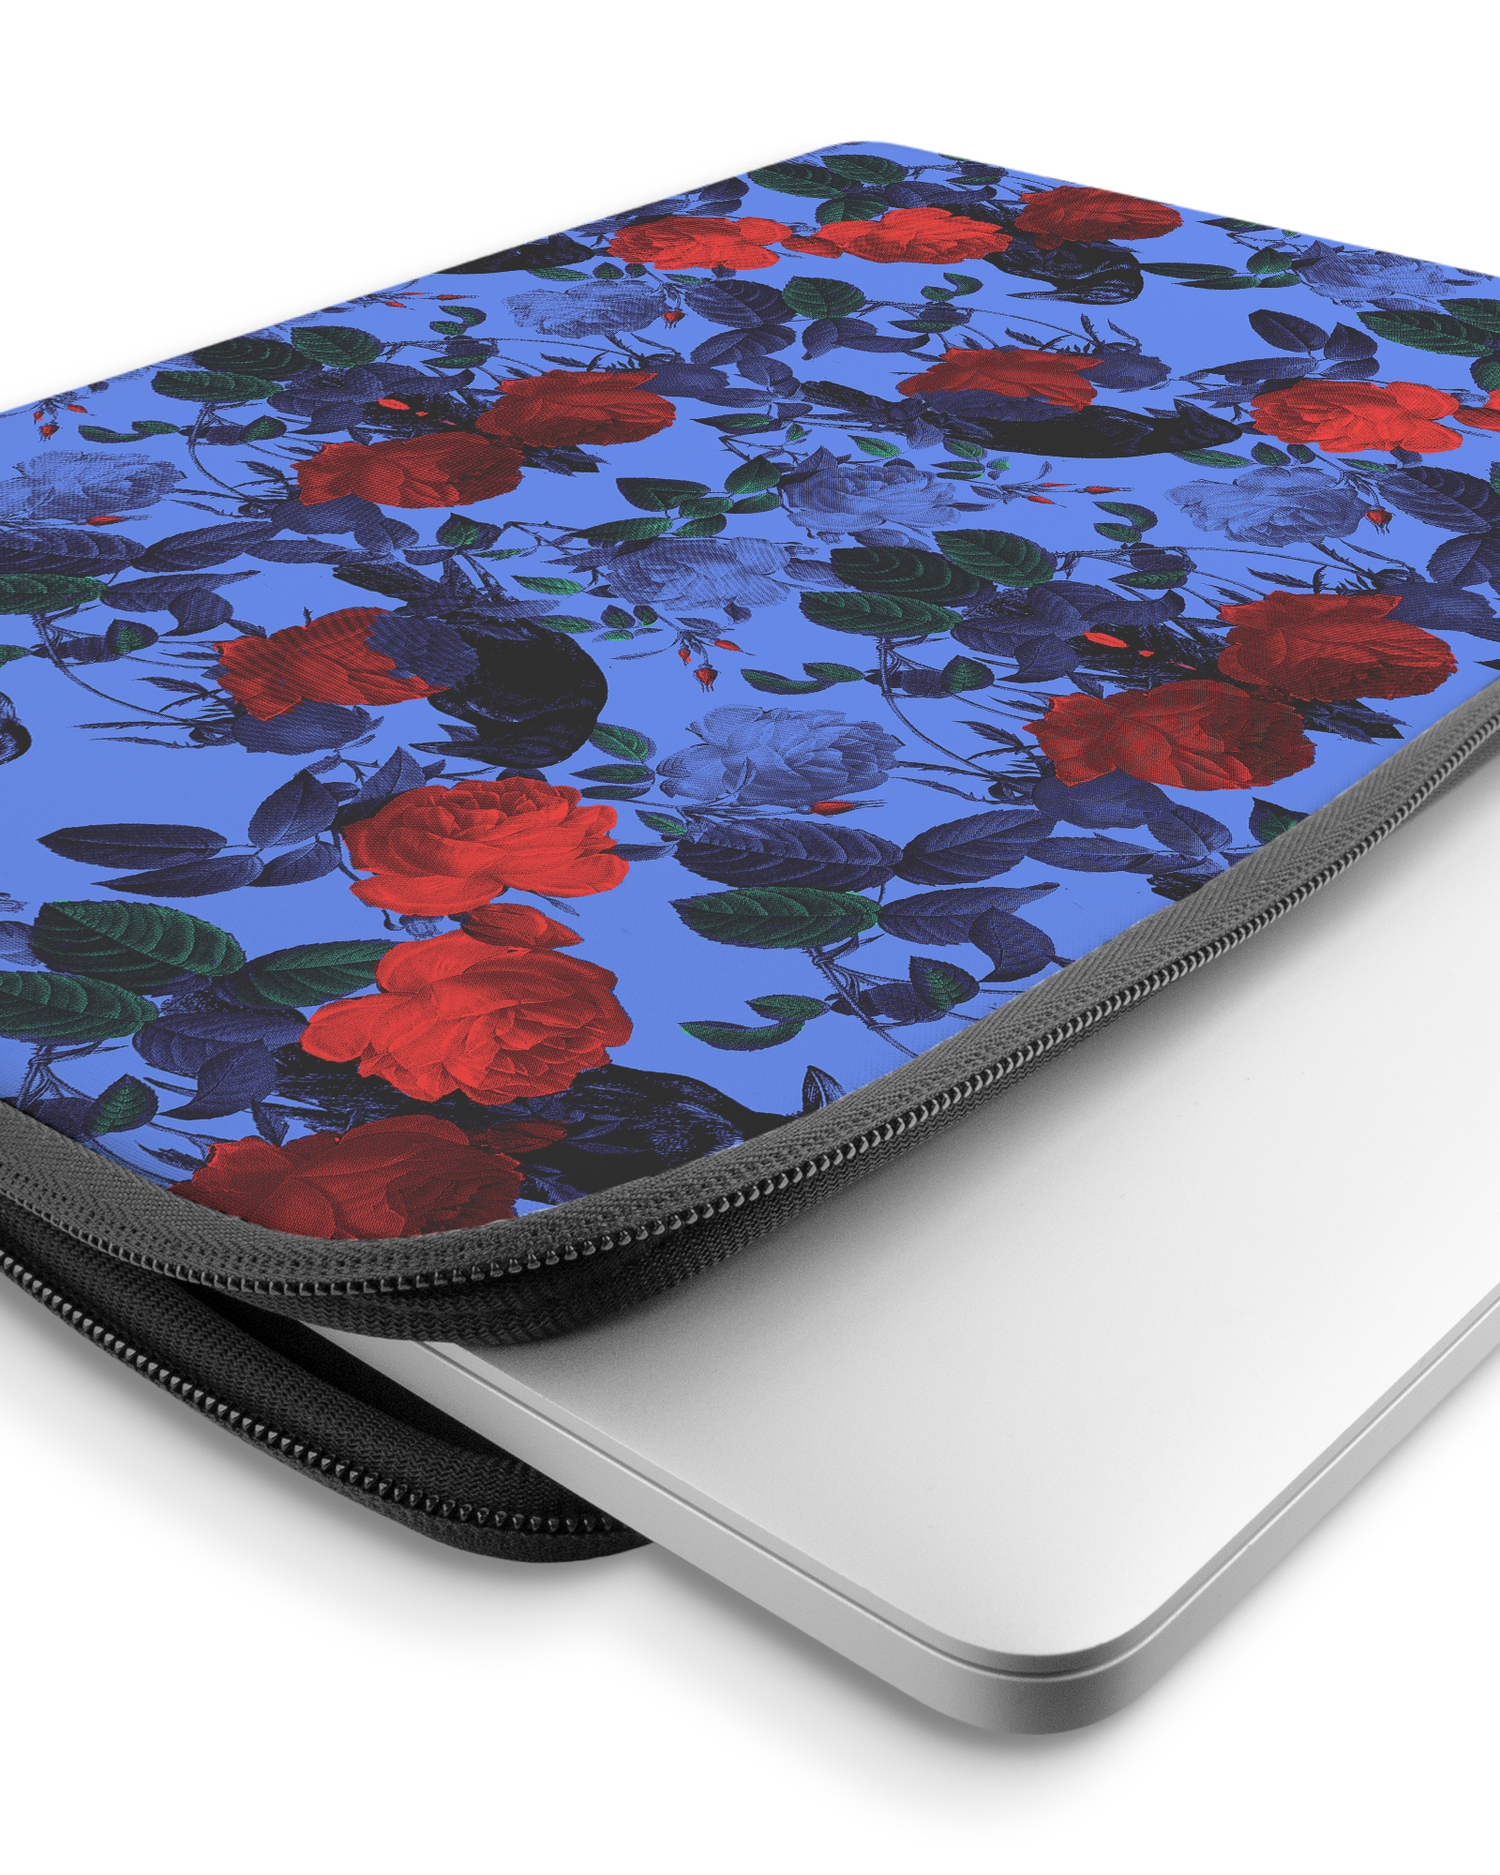 Roses And Ravens Laptop Case 15-16 inch with device inside